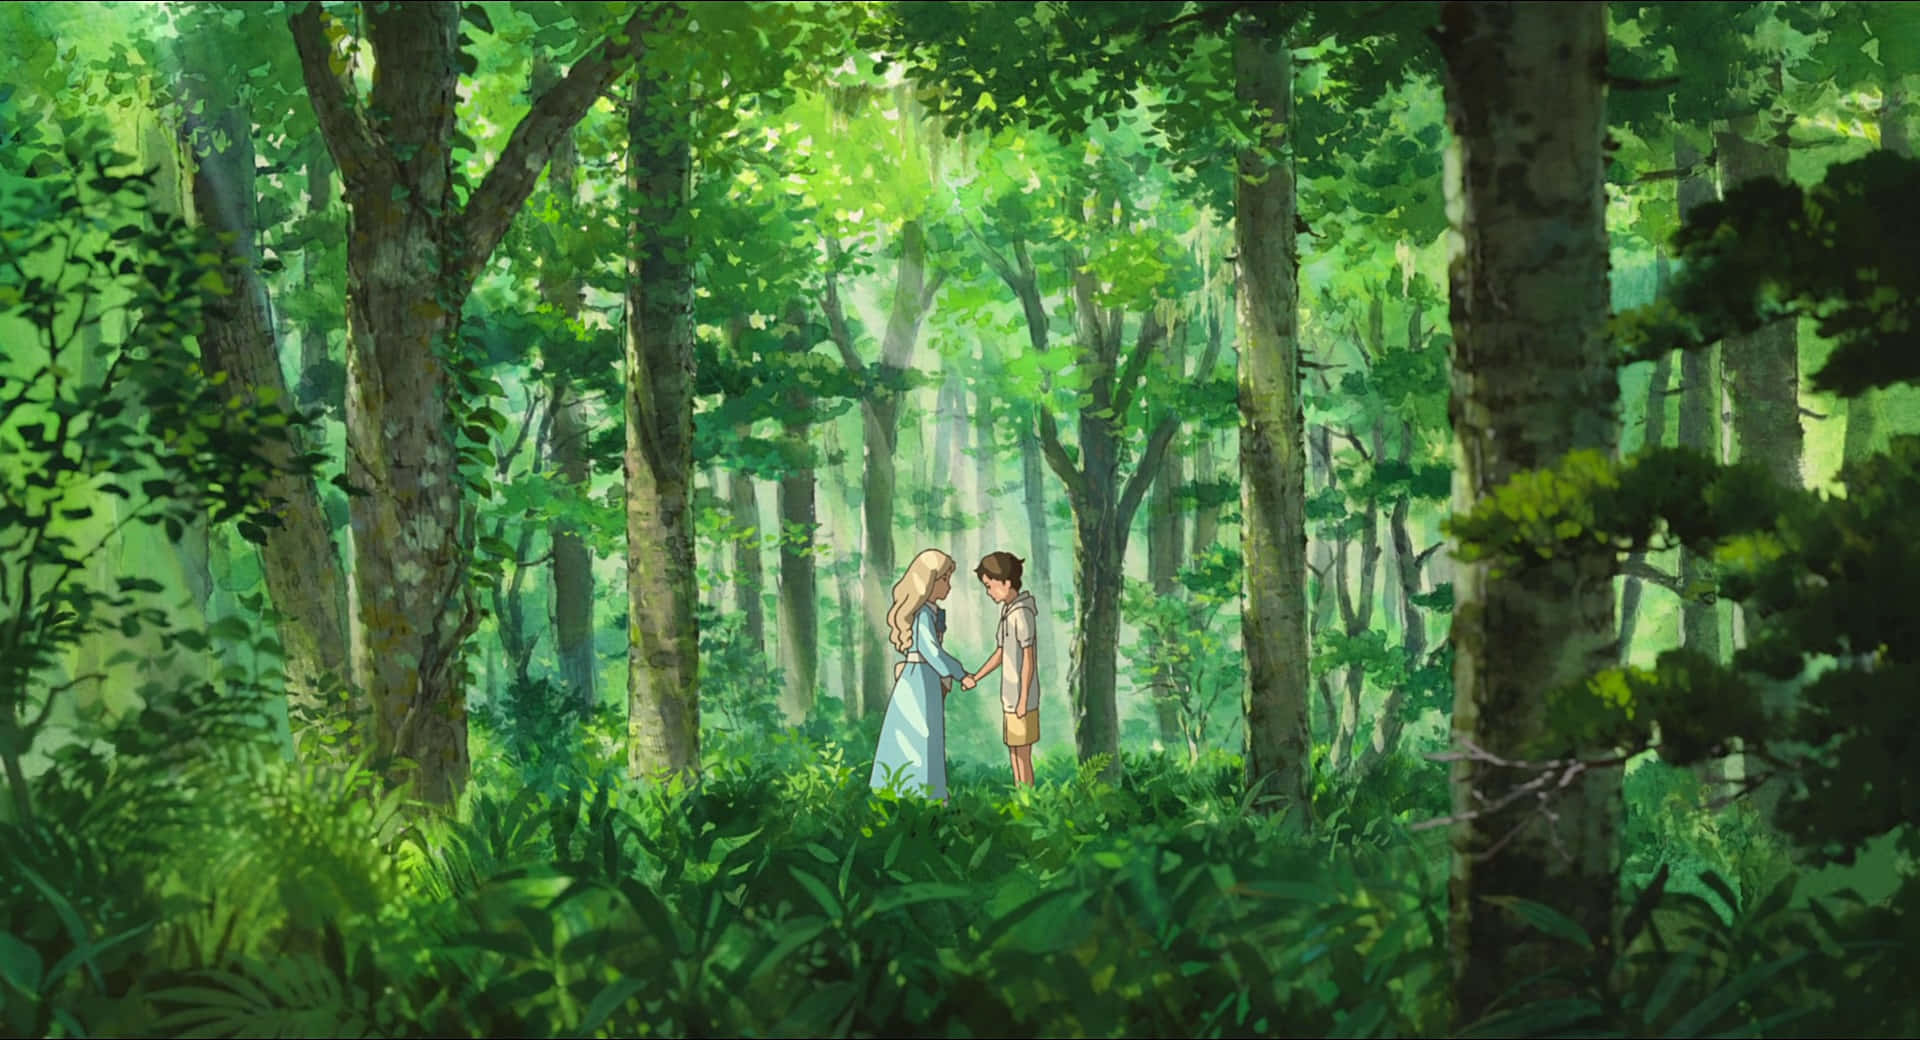 Anna and Marnie in an Enchanting World Wallpaper